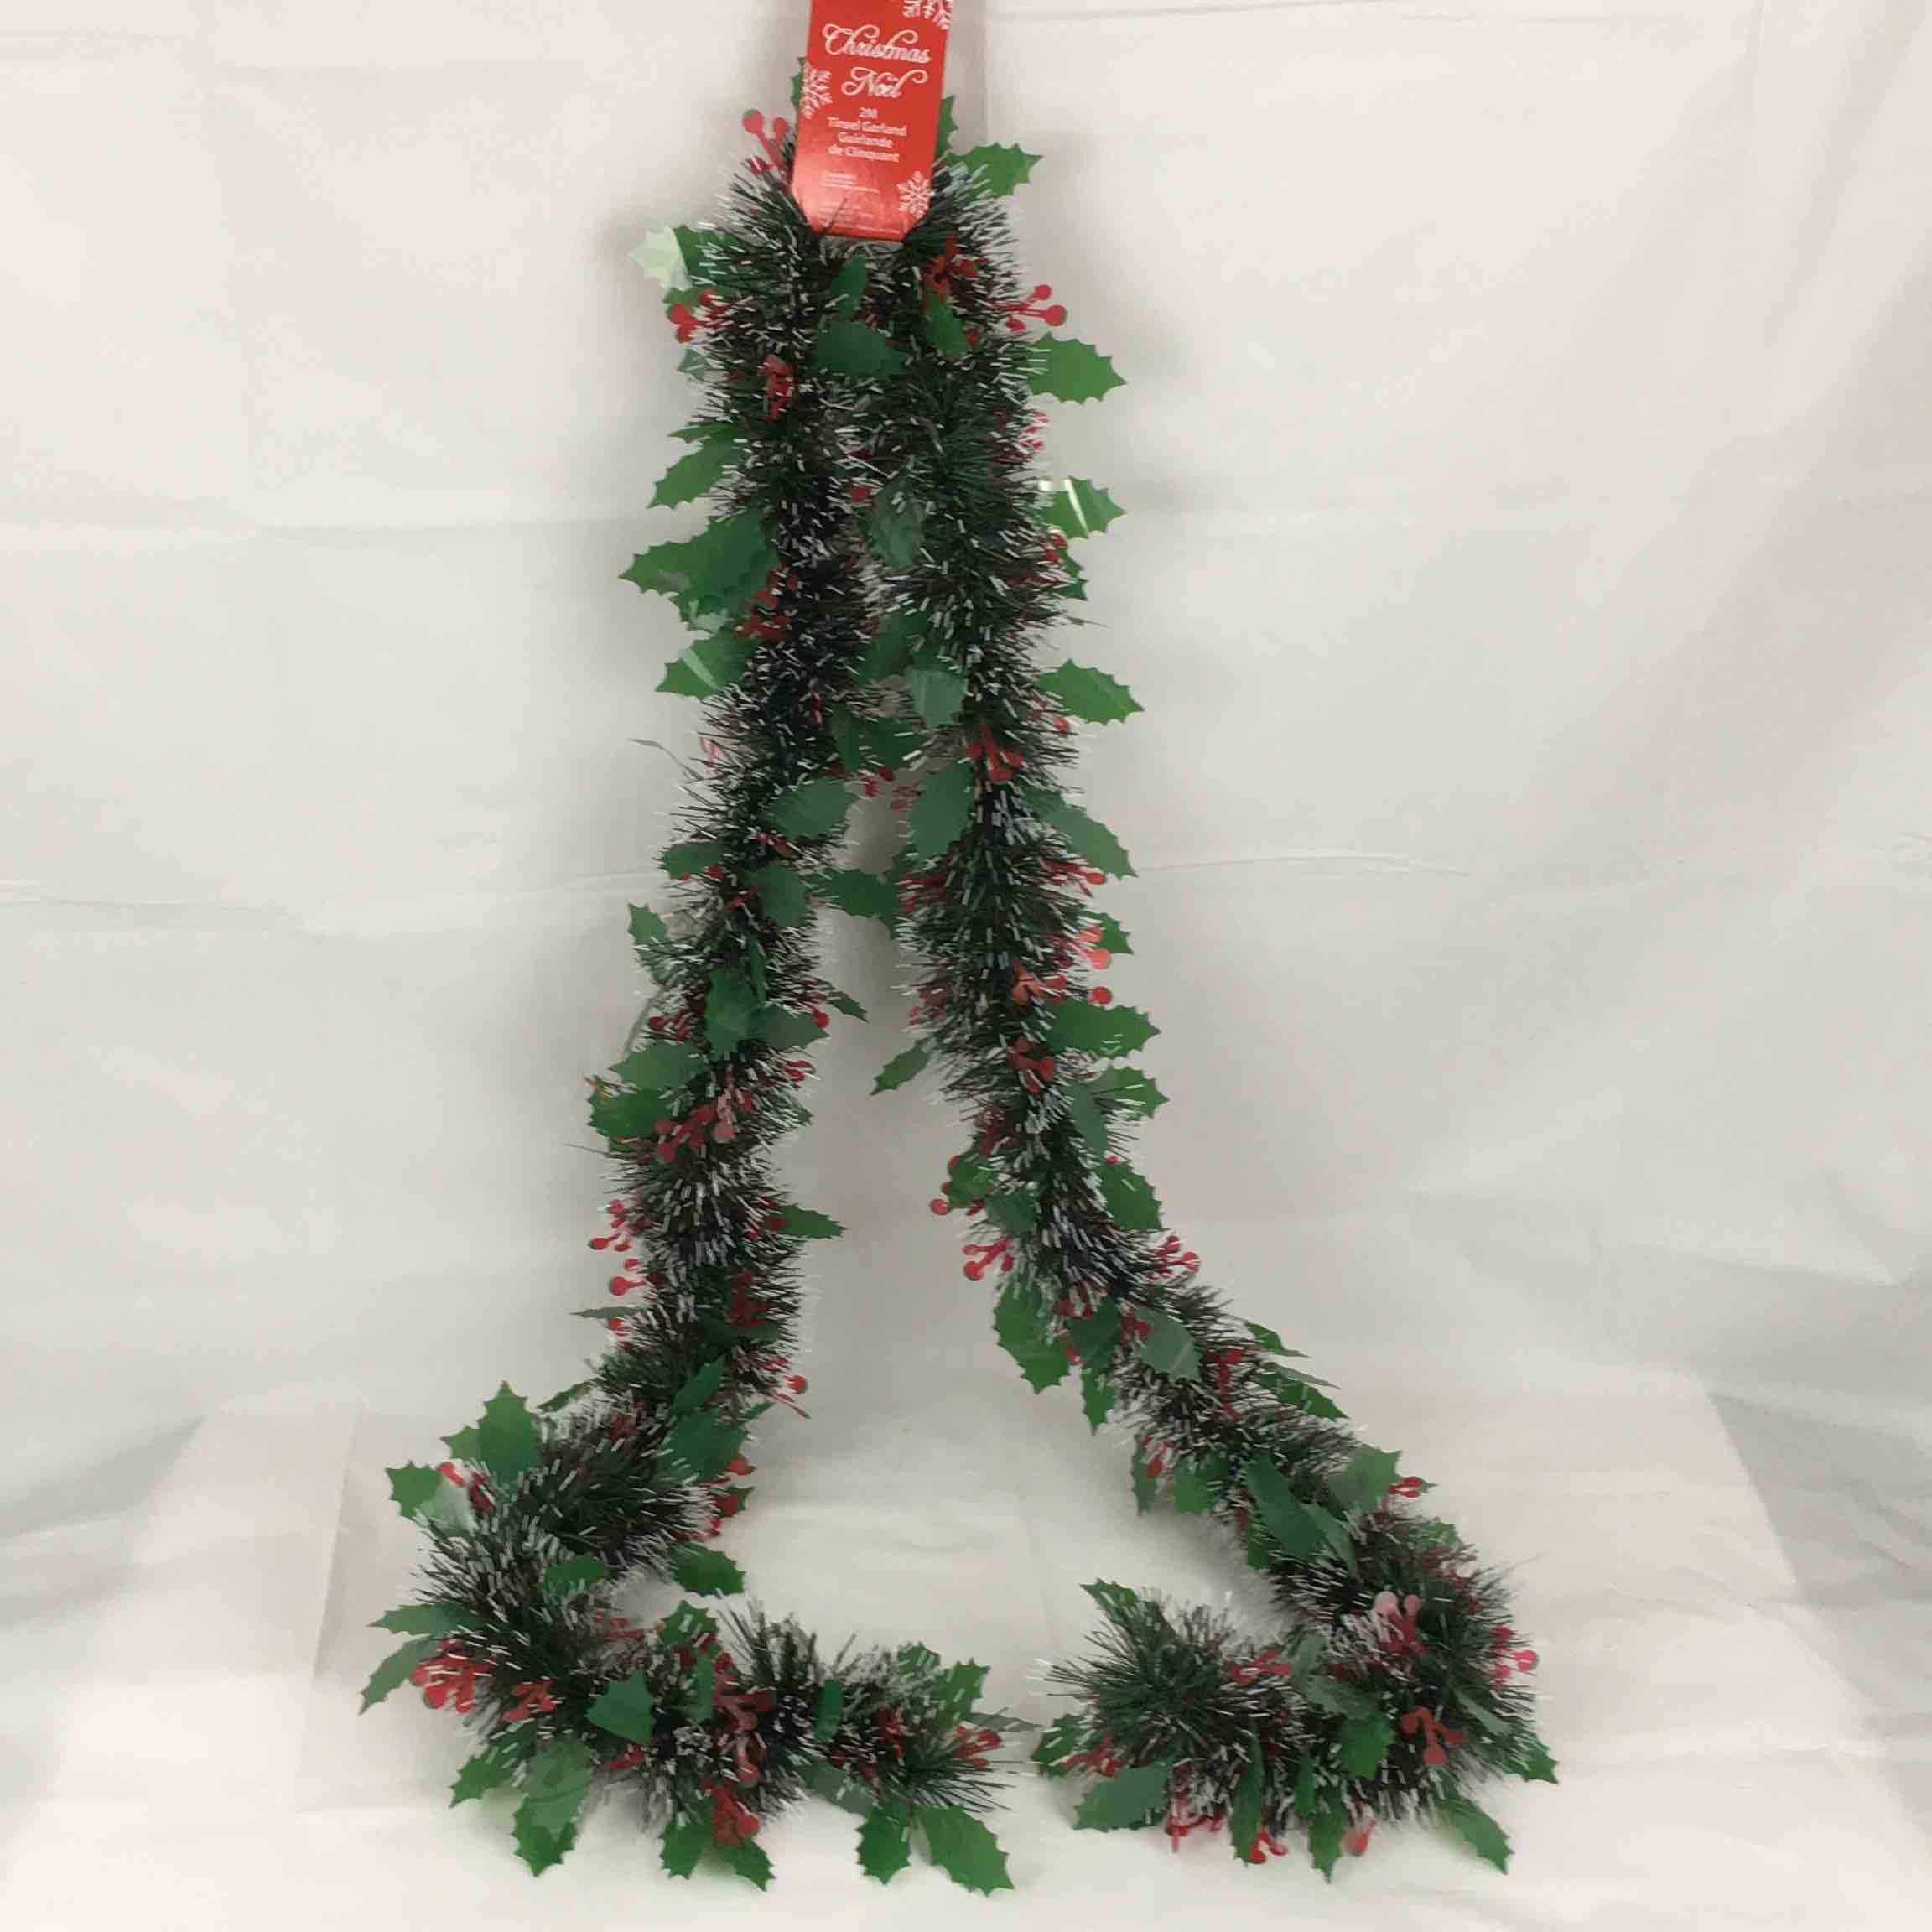 CMAS FOIL DECOR Tinsel Garland 6ply Holly Leaves